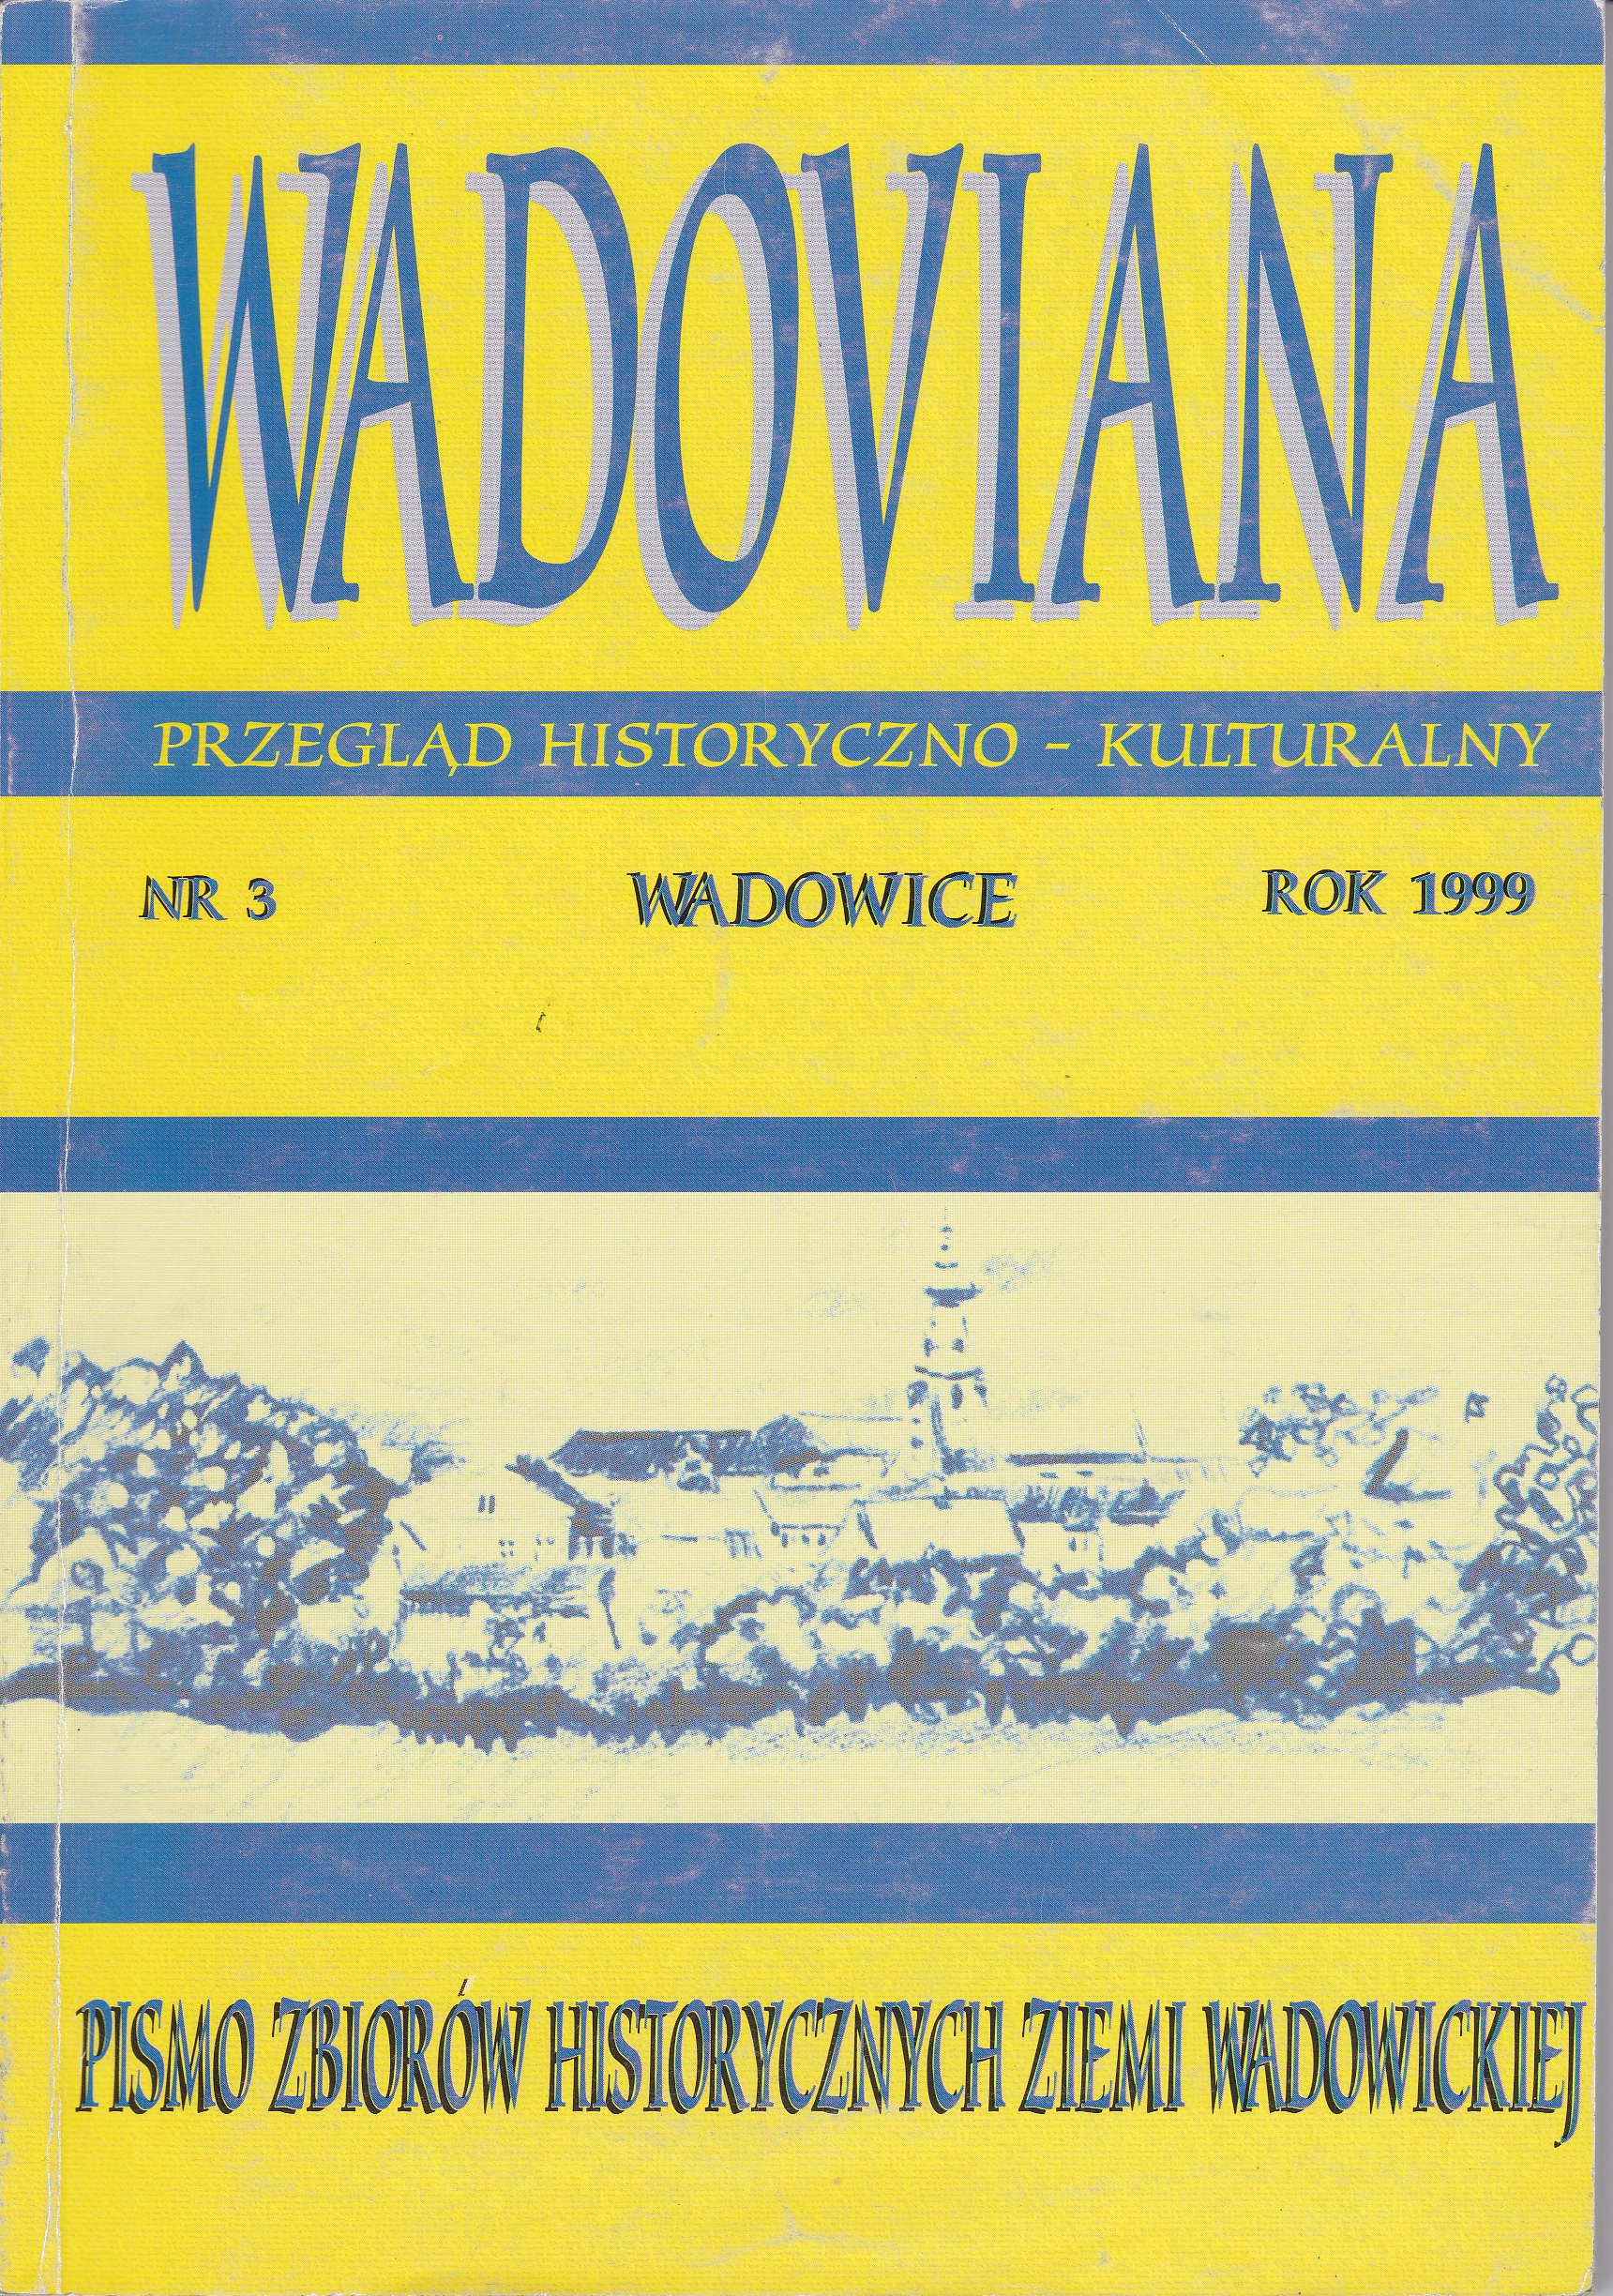 In Wadowice between the wars Cover Image